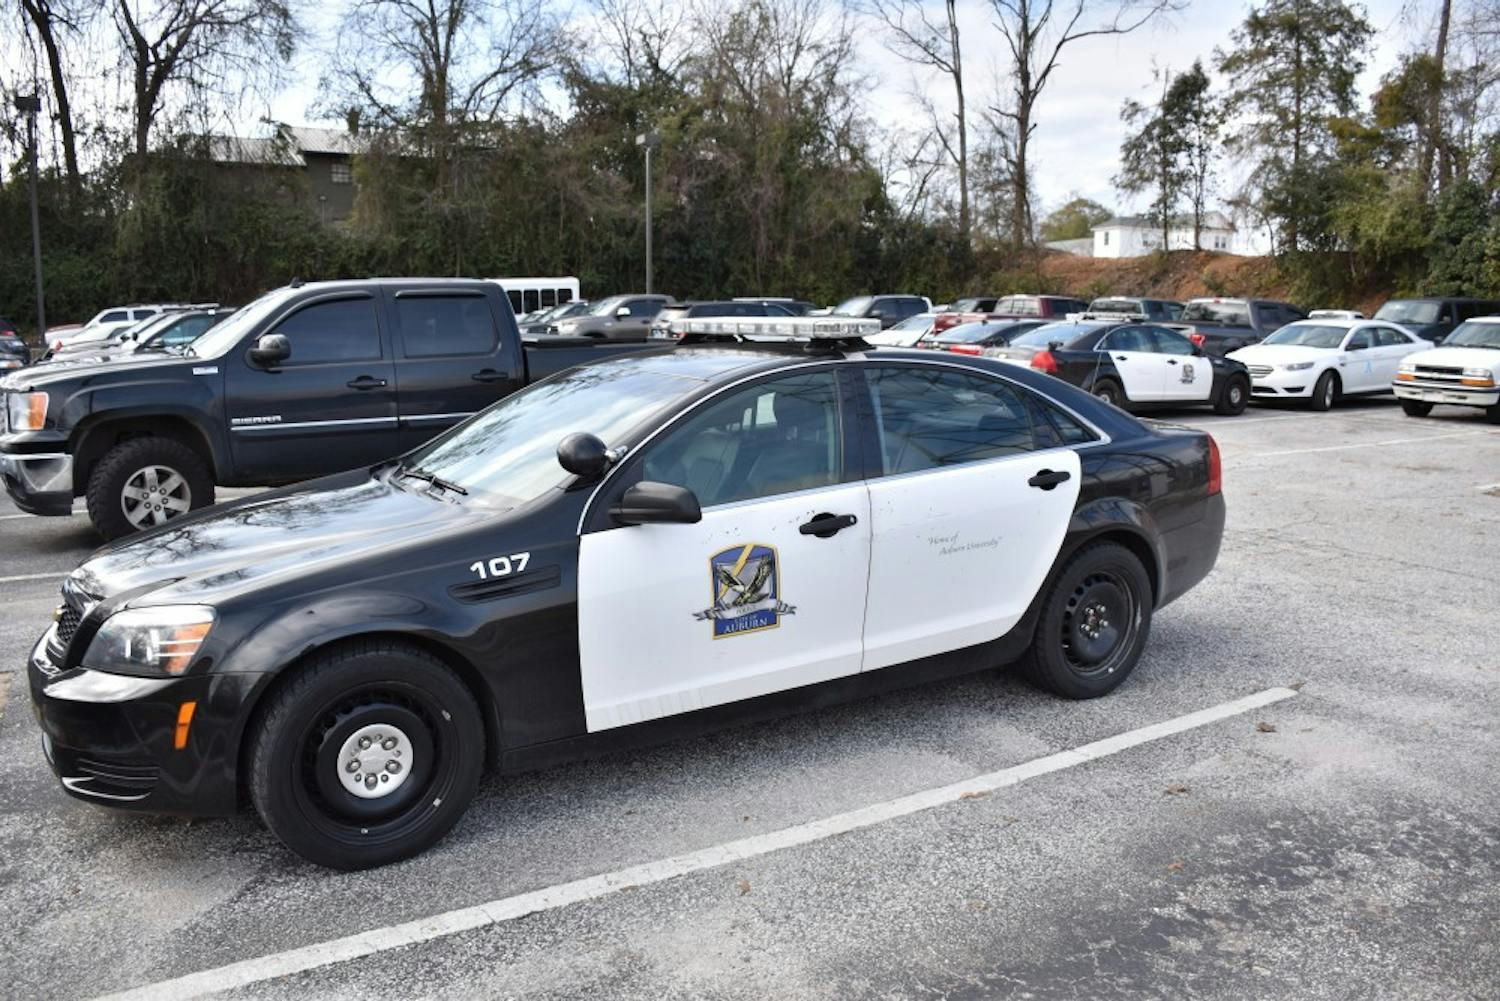 An Auburn Police Department car sits parked outside of the public safety department building on Friday, Feb. 9, 2018, in Auburn, Ala.